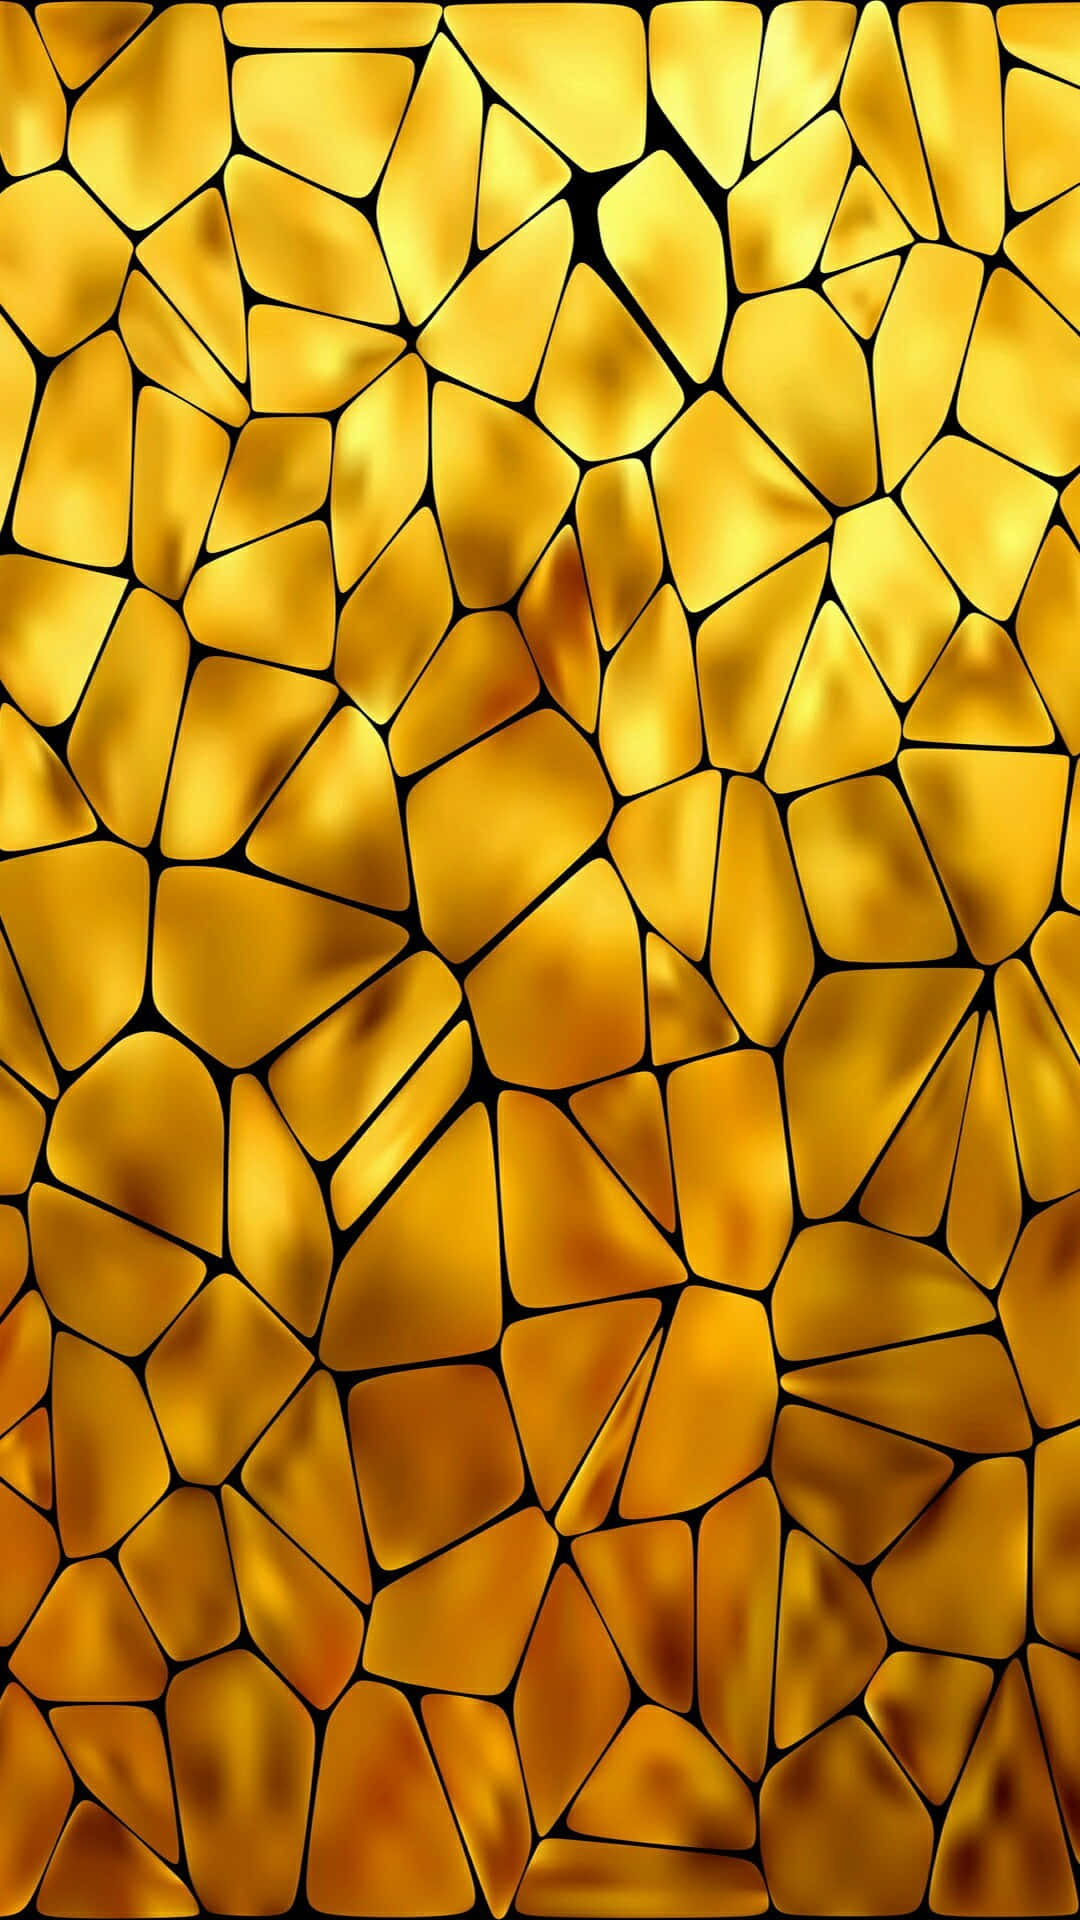 Add A Touch Of Luxury With A Gold Iphone Background